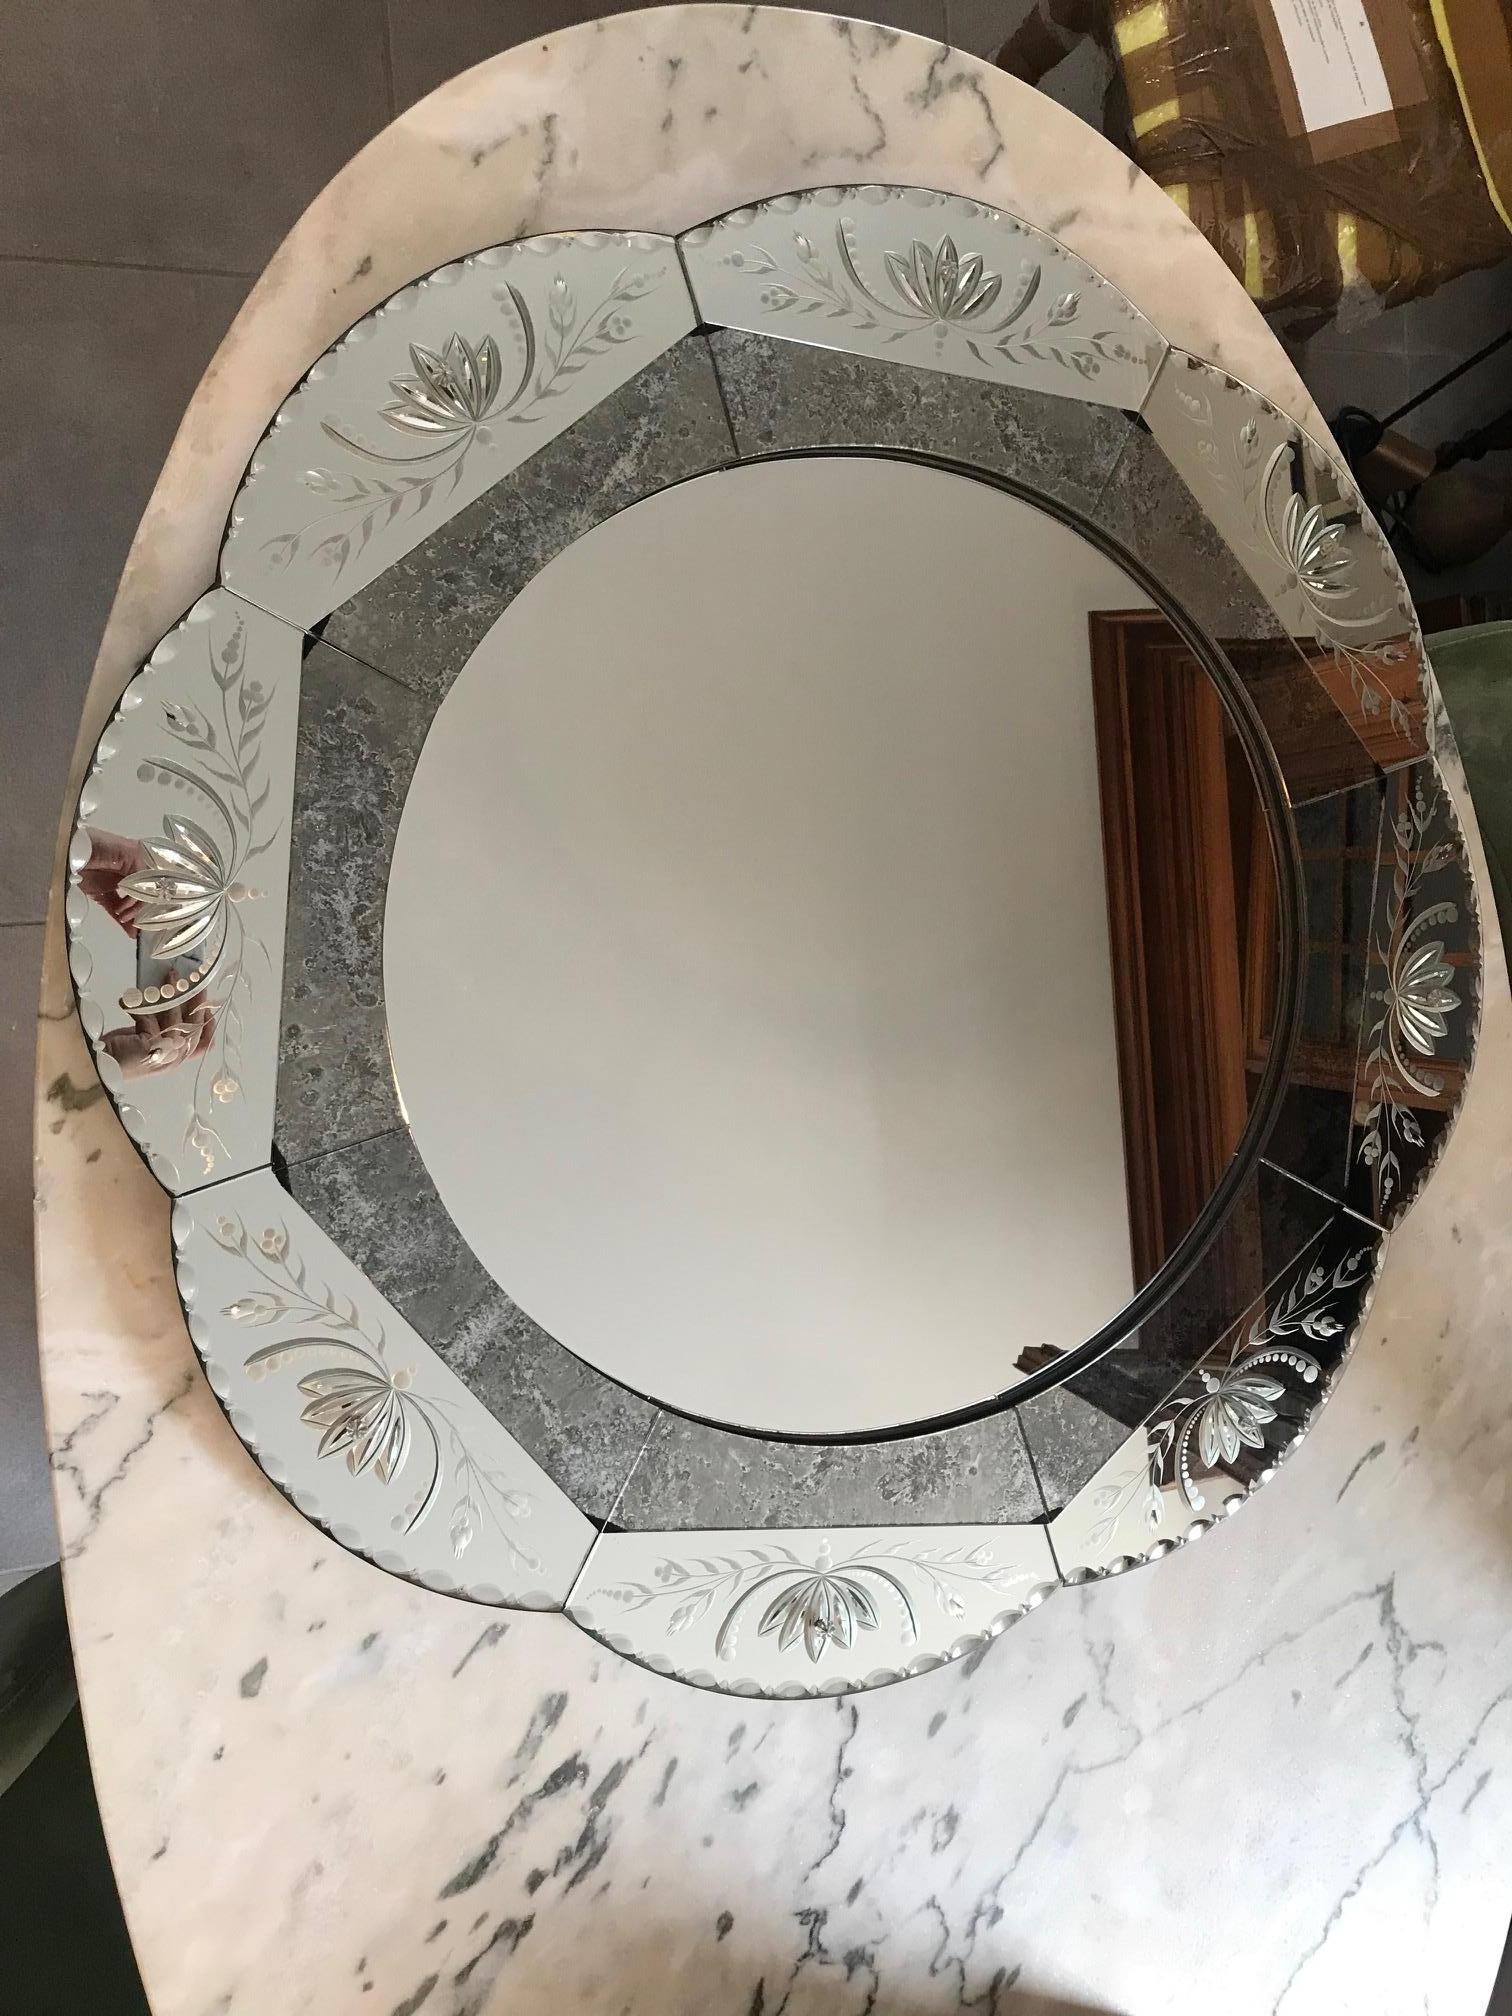 Beautiful 20th century round venitian mirror from the 1950s. 
Very nice engraved flowers work. 
Good quality and perfect condition.